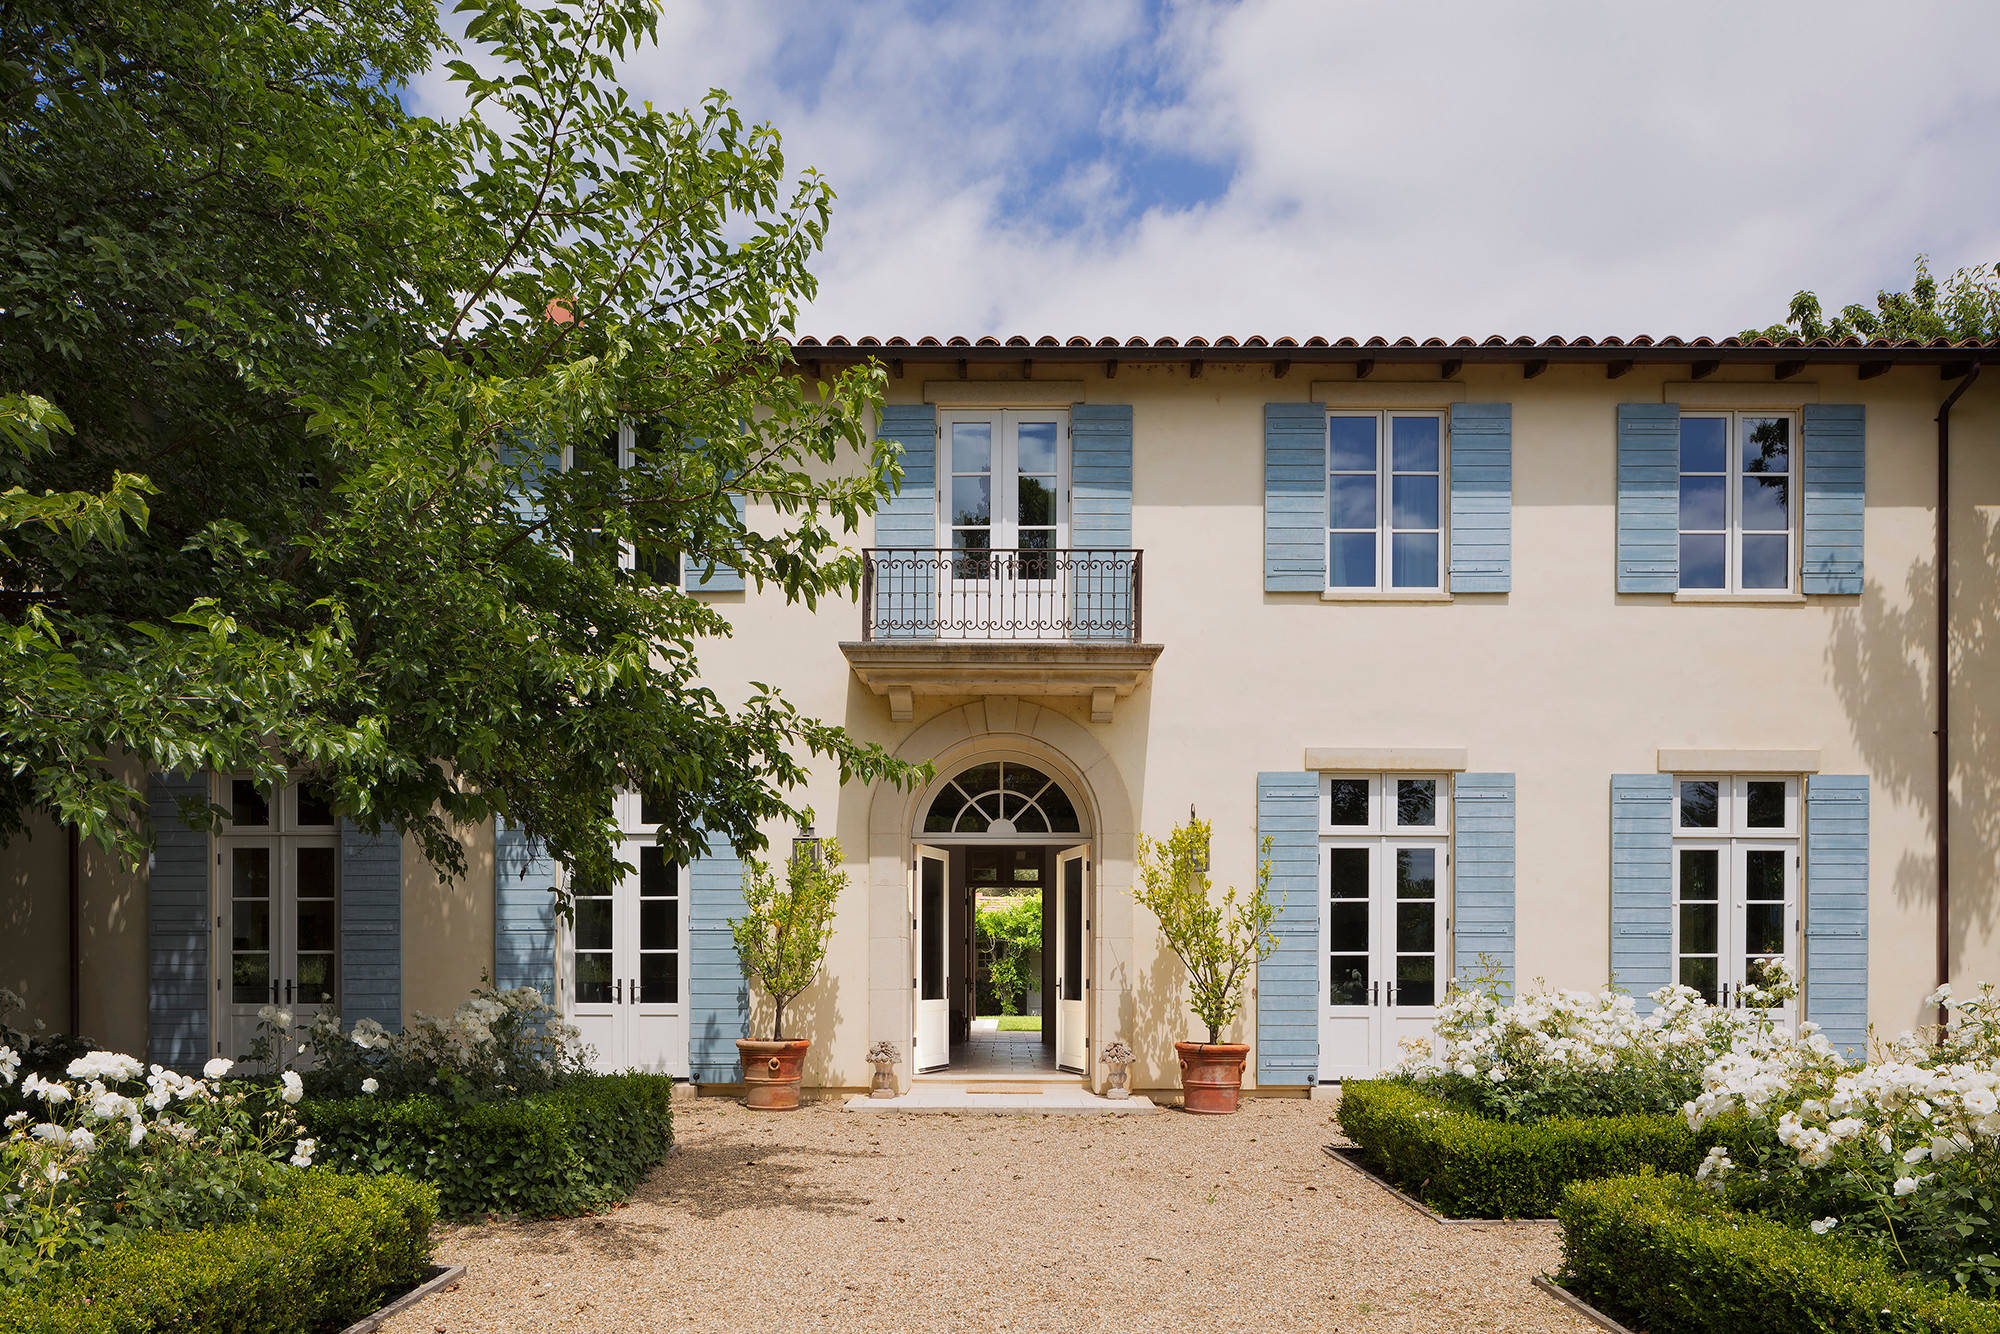 75 French Country Exterior Home Ideas You'Ll Love - May, 2023 | Houzz